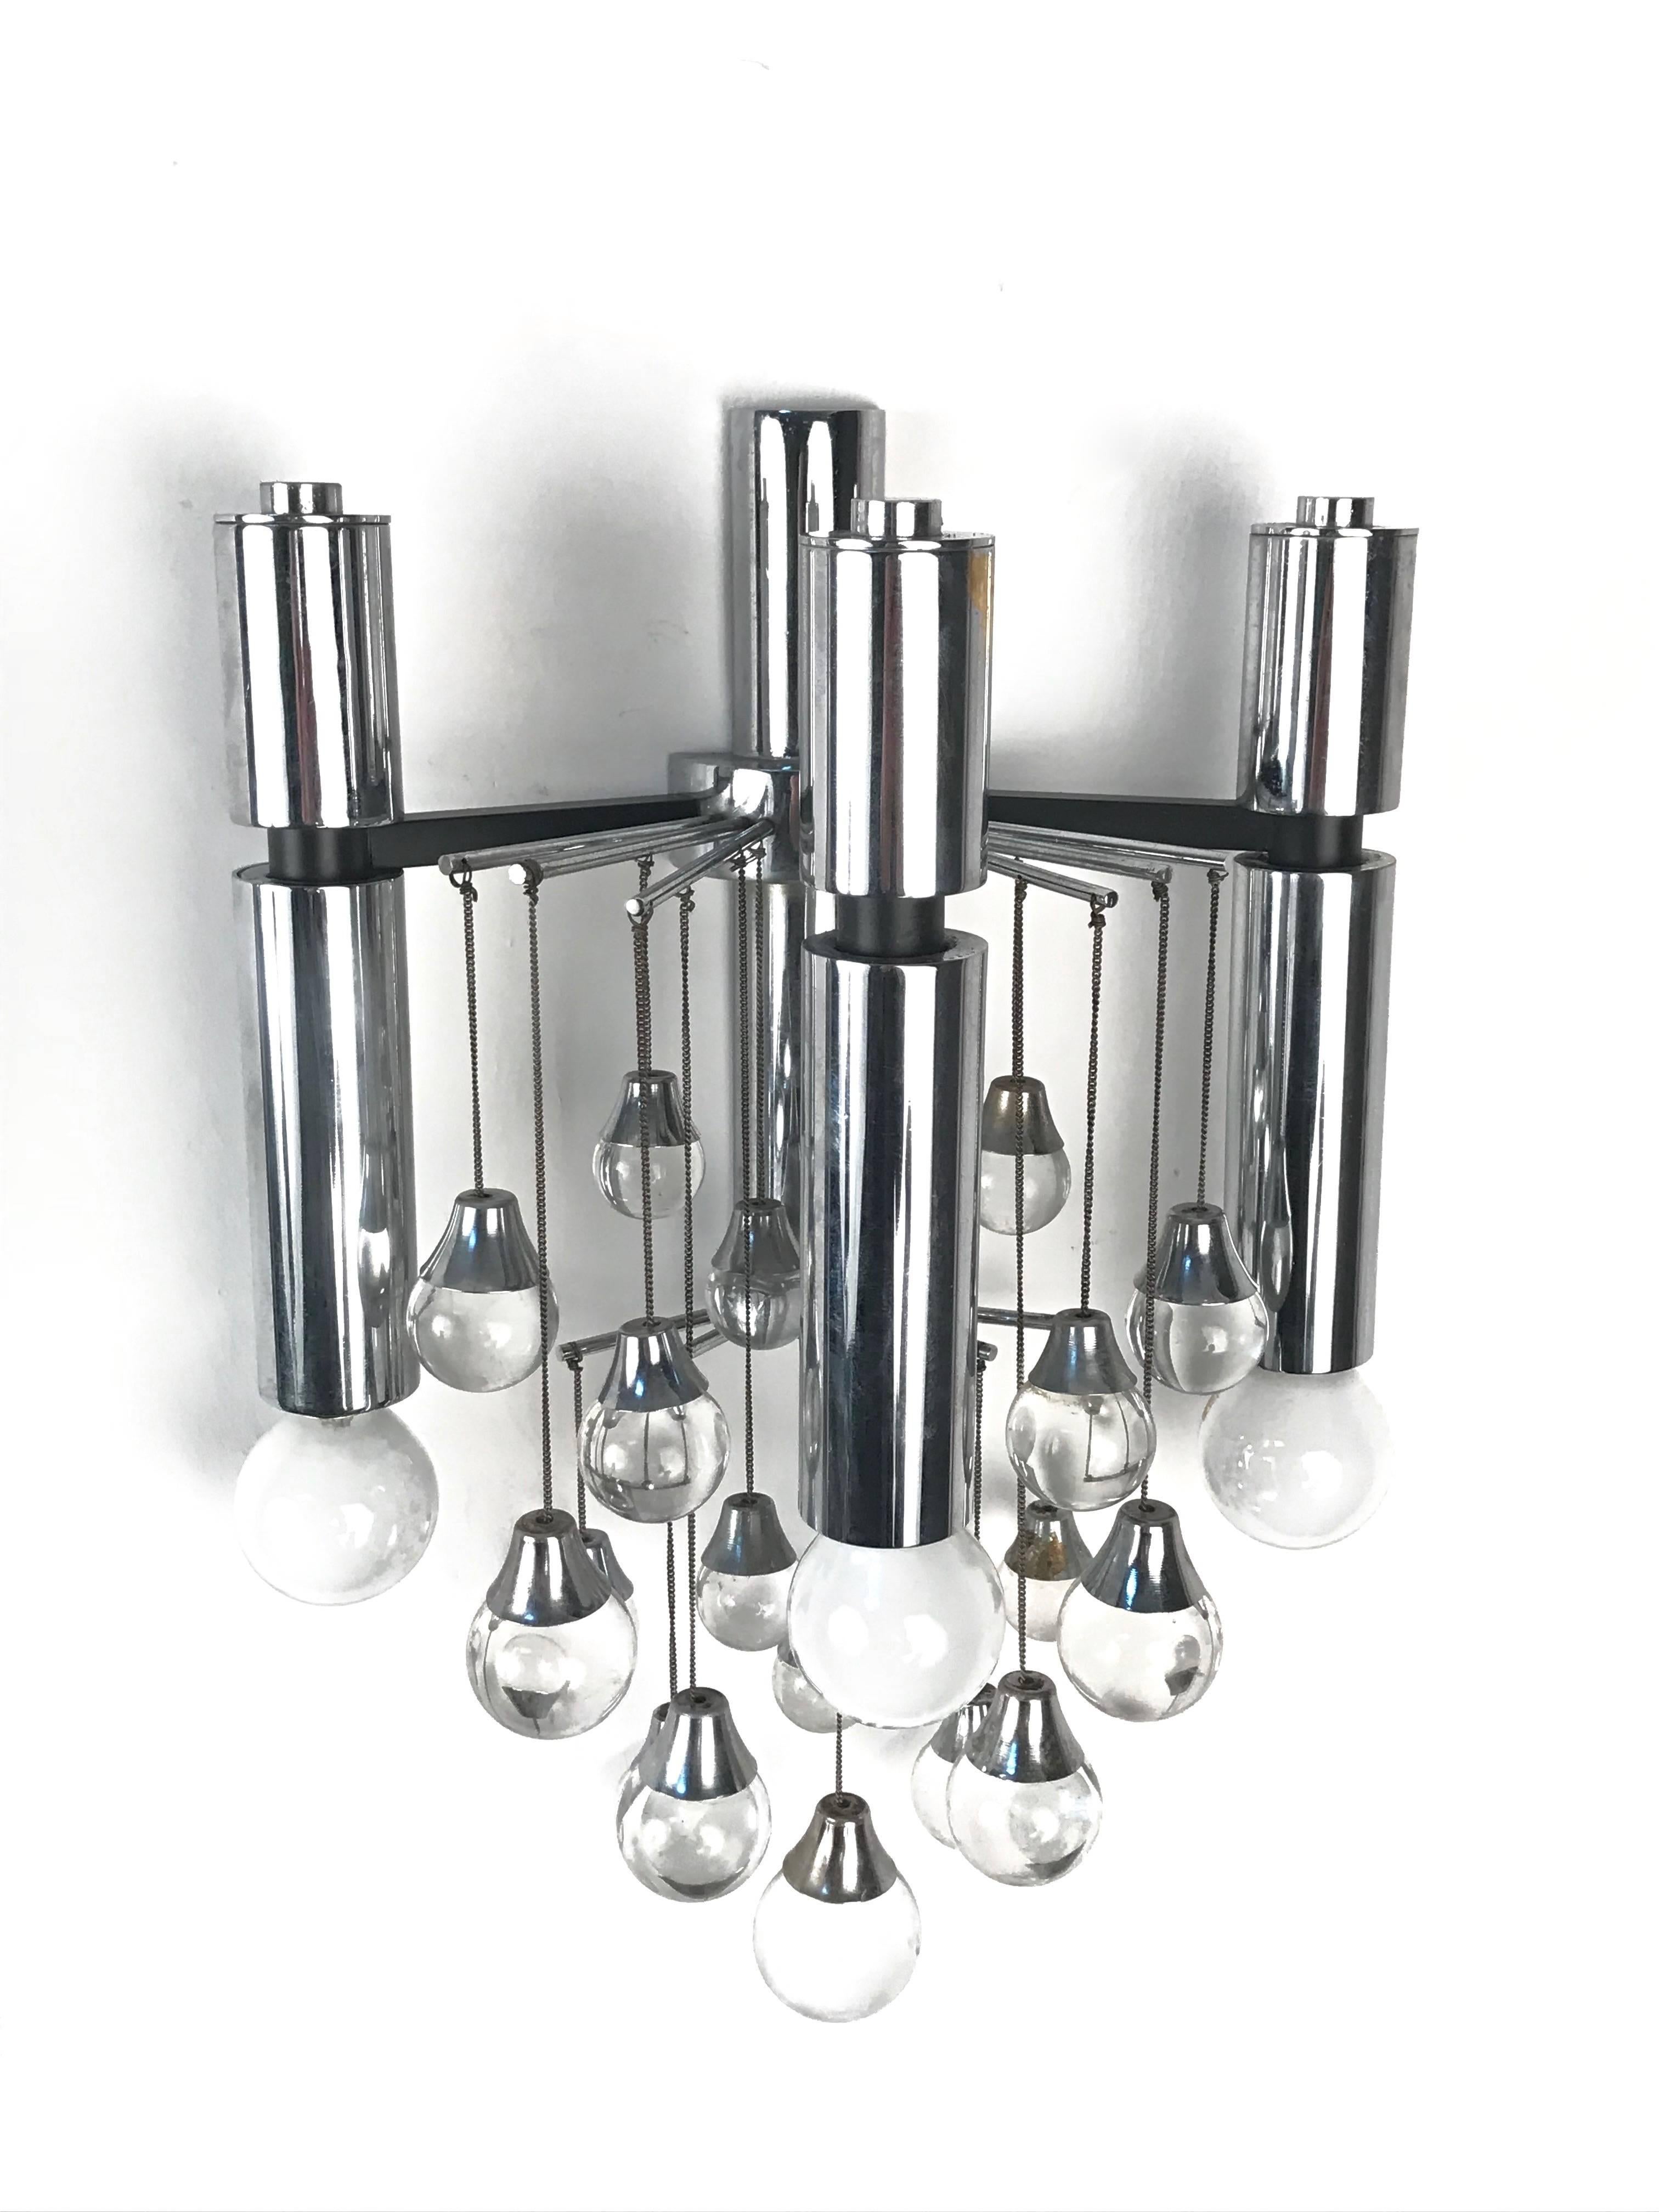 Pair of Sciolari Chrome and Glass Italian Sconces with Three Lights, 1960s For Sale 7